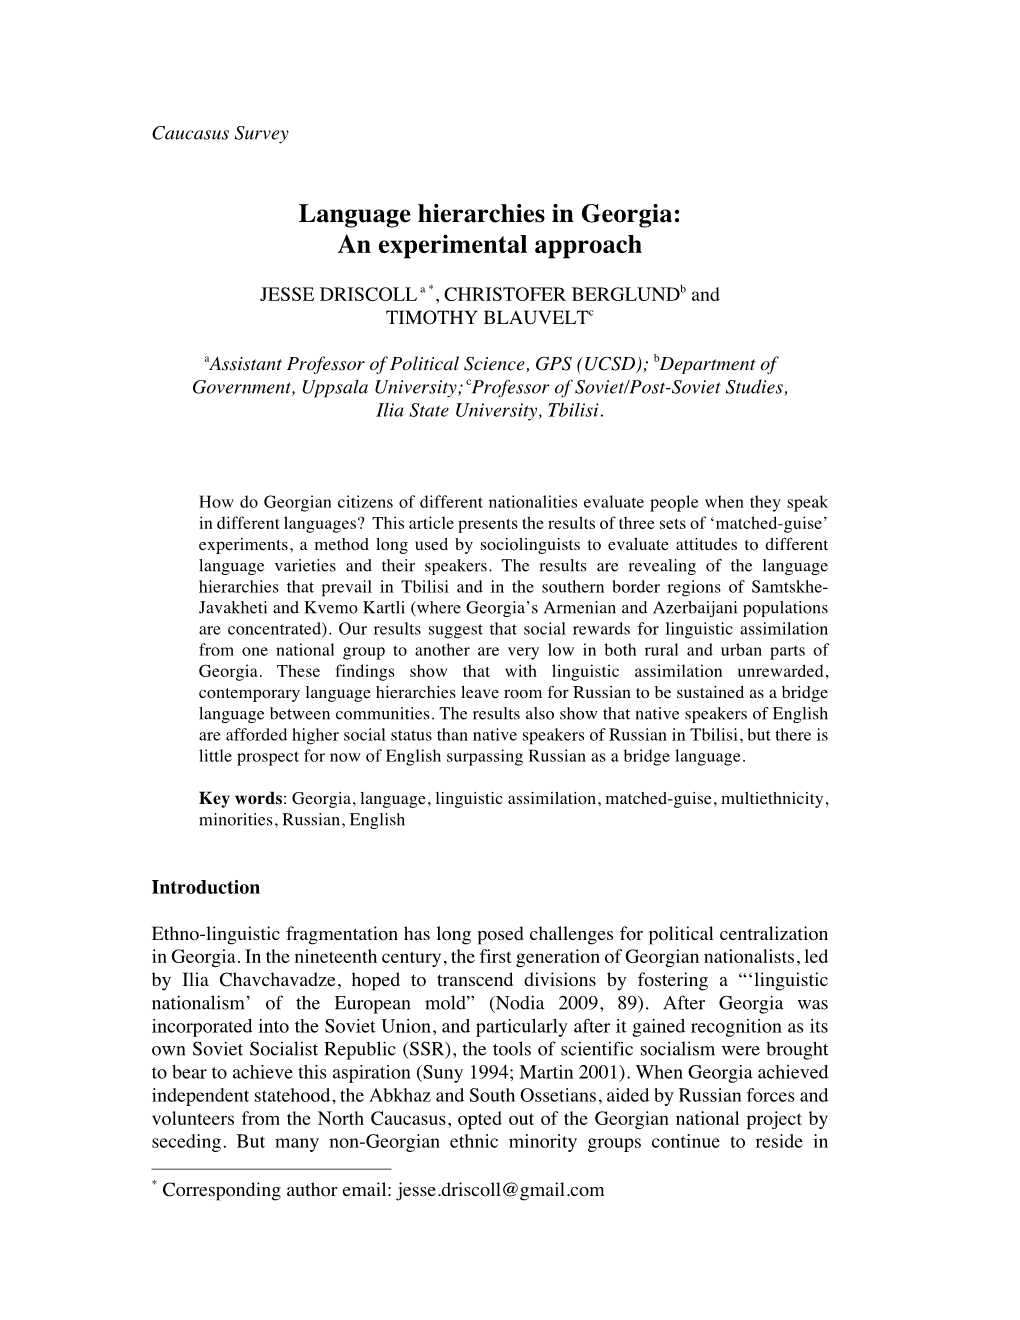 Language Hierarchies in Georgia: an Experimental Approach